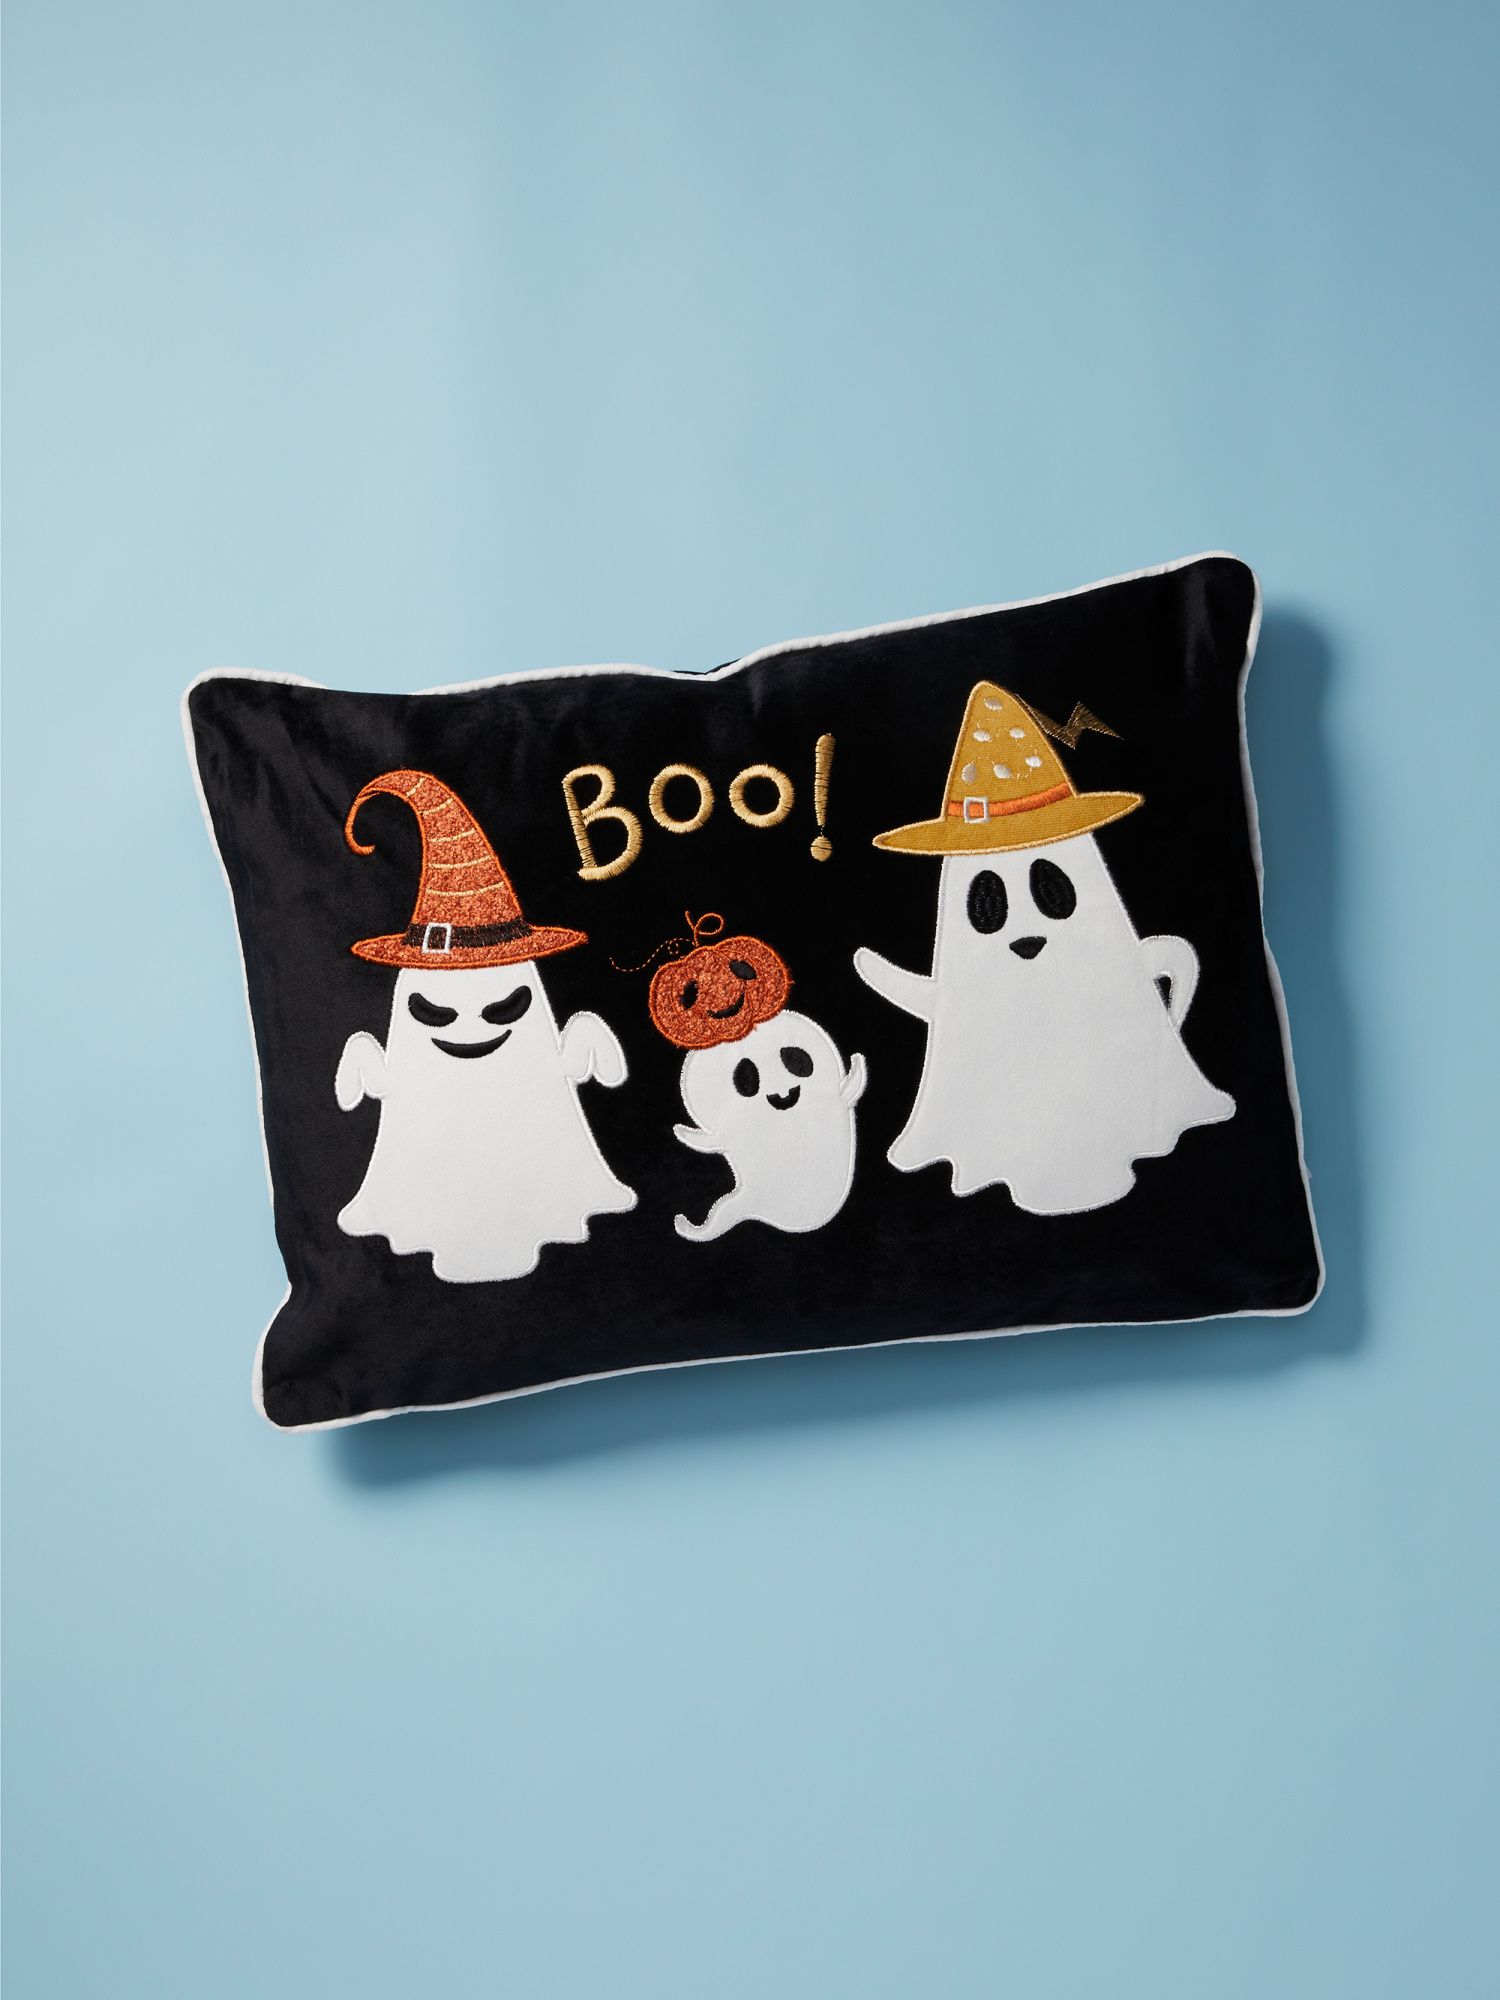 14x20 Boo Ghost Velvet Pillow With Applique And Embroidery | Halloween | HomeGoods | HomeGoods